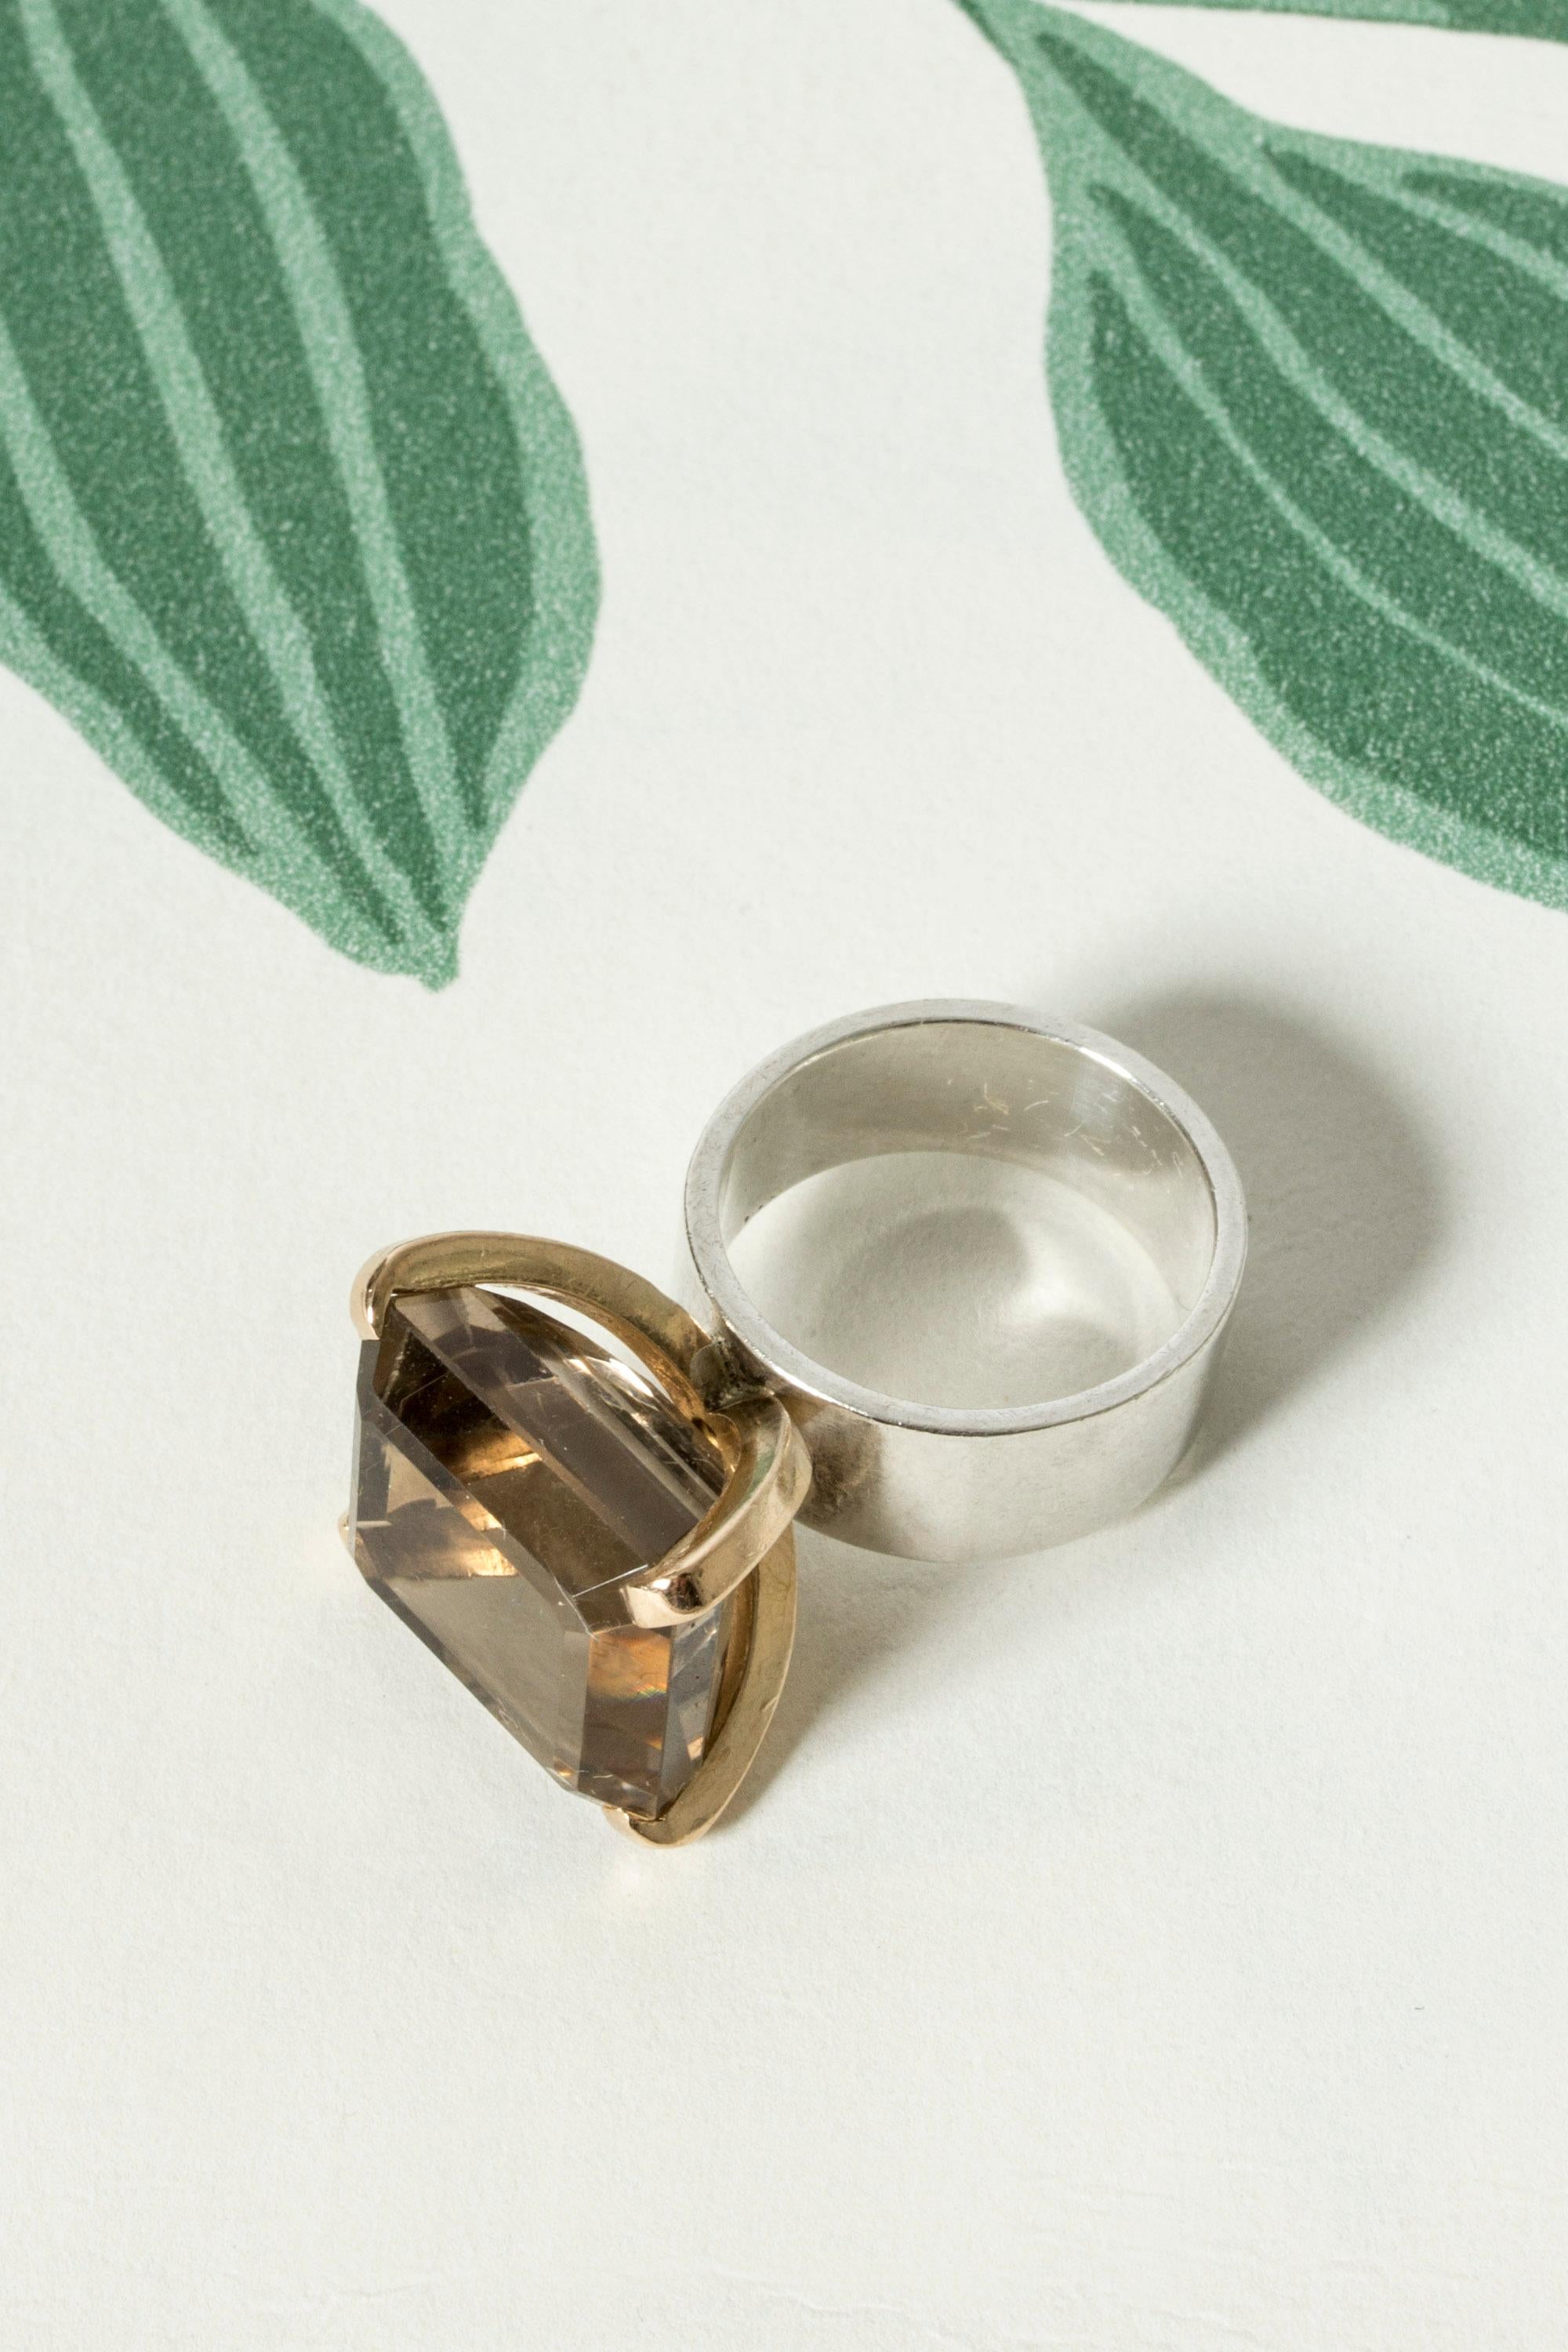 Amazing silver ring by Cecilia Johansson, with a large square smoke quartz stone, elevated in a gold frame. Cool and striking design that combines materials in a beautiful, luxurious way.